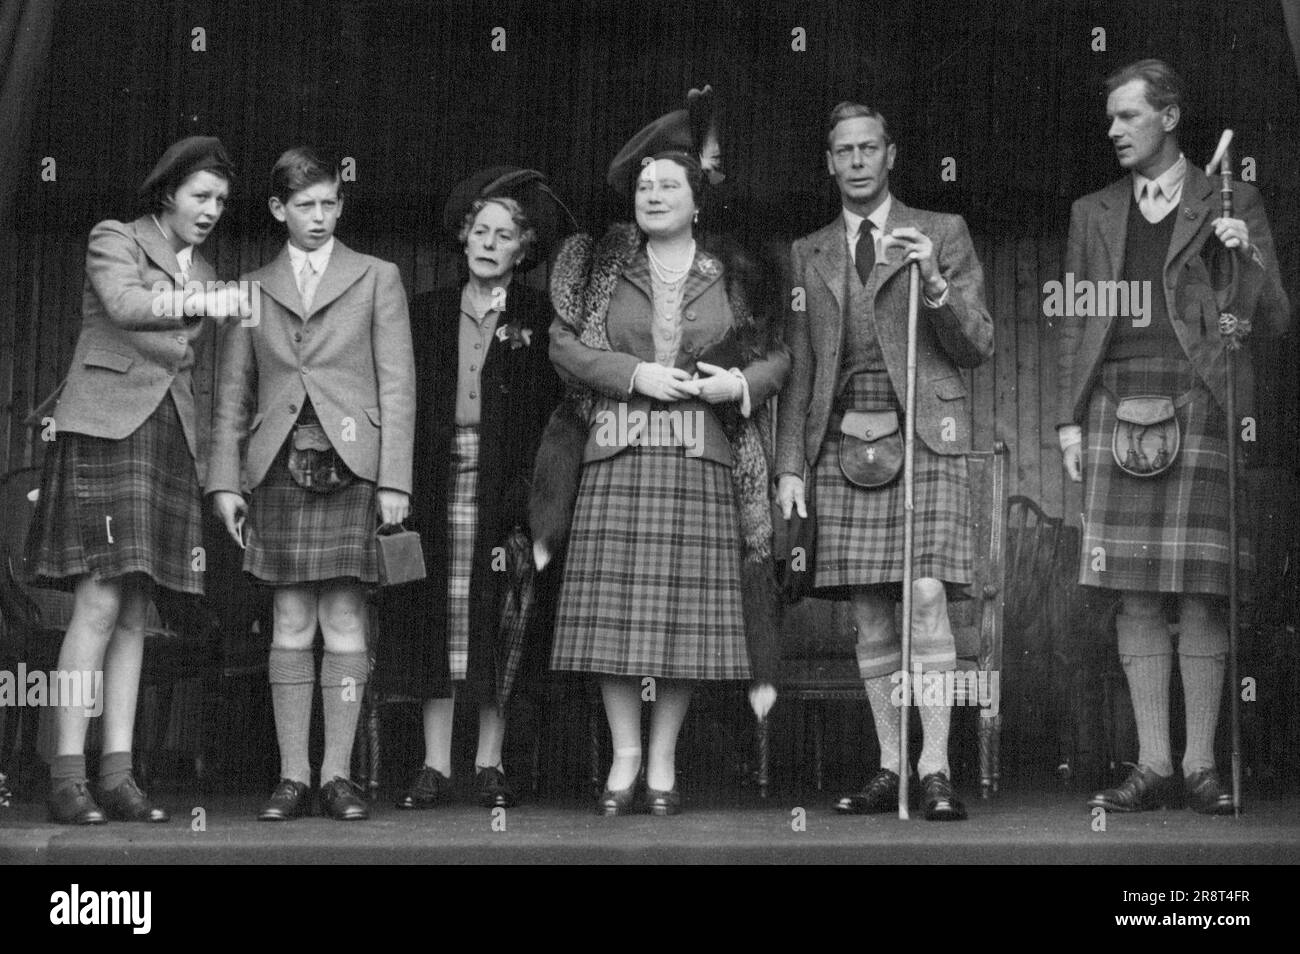 The King And Queen Attend Braemar Gathering - Left to right: Princess Alexandra of Kent, the Duke of Kent, Marchioness of Aberdeen and Temair, H.M. The Queen (wearing a skirt of Hunting Stet Tartan with dark blue tweed jacket), H.M.The King, also in Highland, dress, and Captain Alwyne A. Compton, of Invercauld, watching the Games. The King and Queen - holidaying in Scotland - attended the Braemar Gathering, the famous Scottish sports meeting and which this year attracted nearly 30,000 spectators including many visitors from abroad. September 9, 1948. (Photo by Sport & General Press Agency… Stock Photo